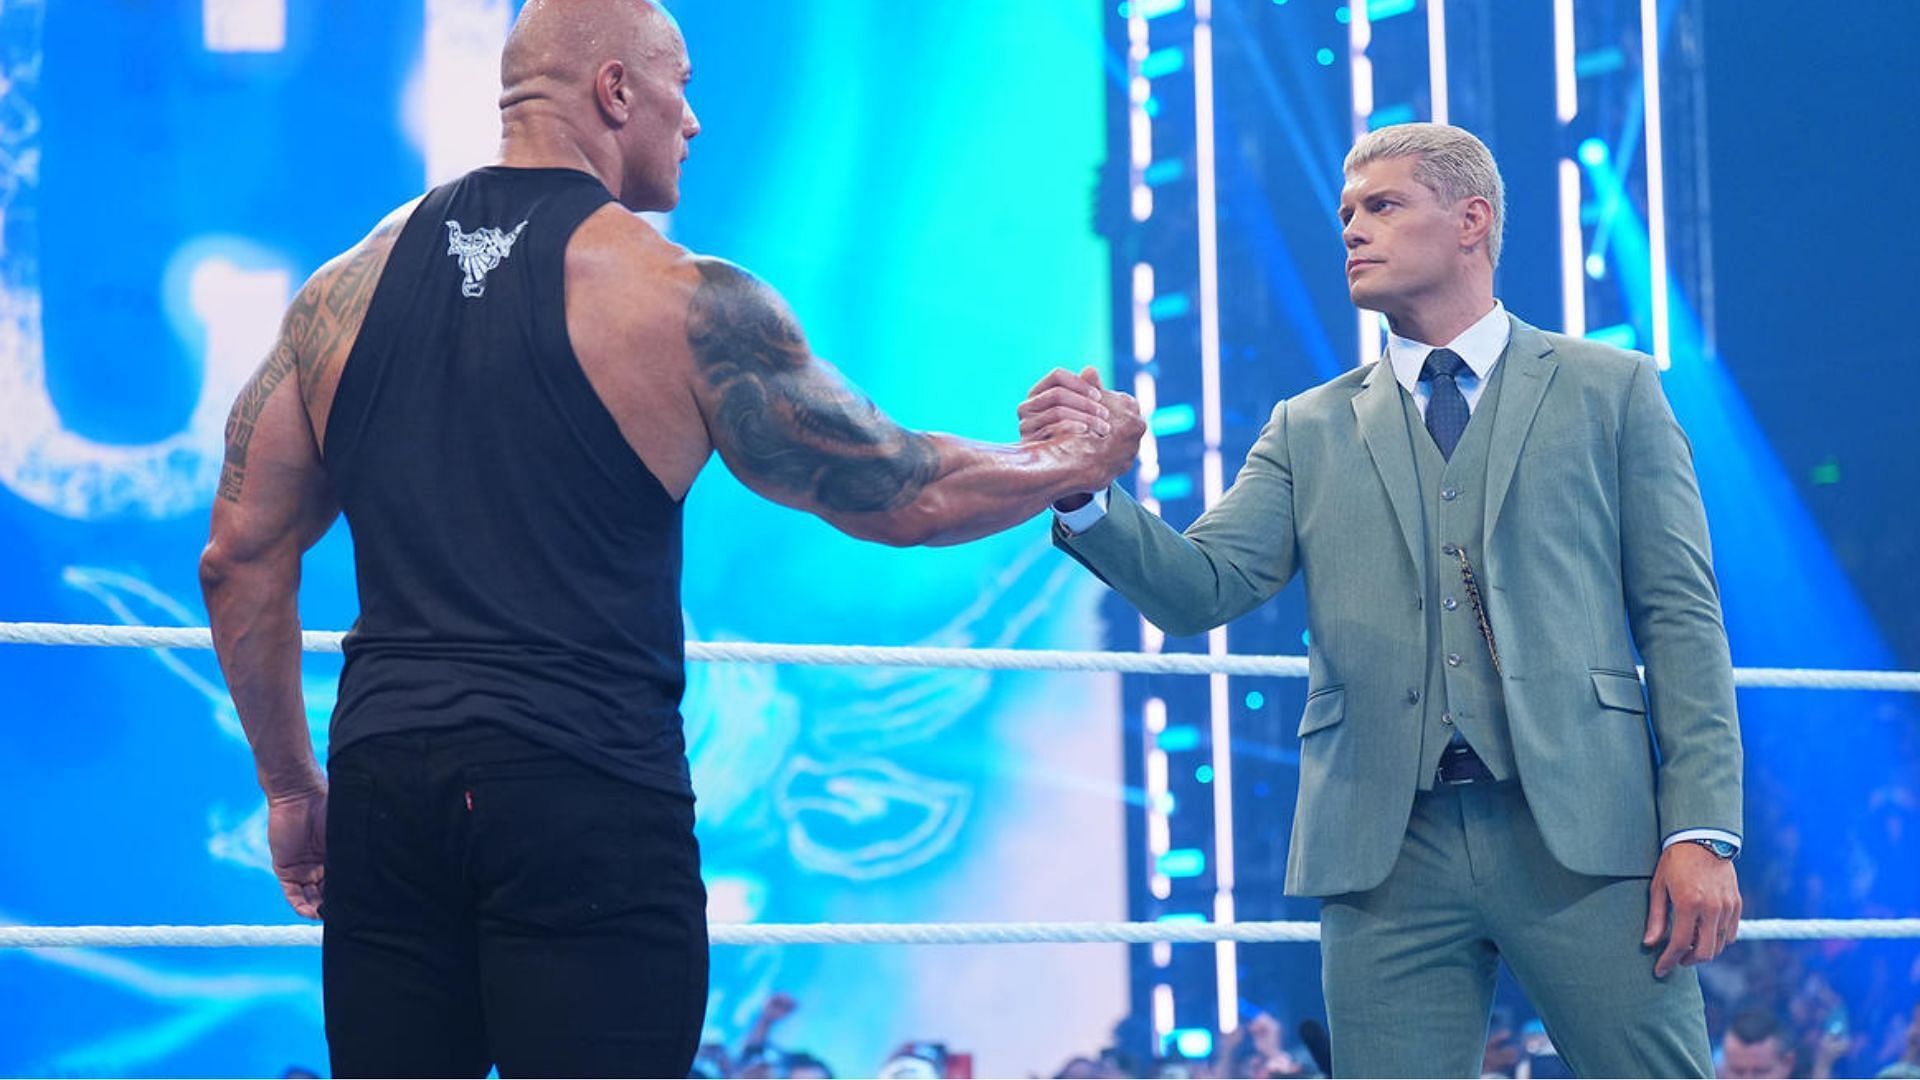 The Rock (left) and Cody Rhodes (right) negotiated a deal on SmackDown.